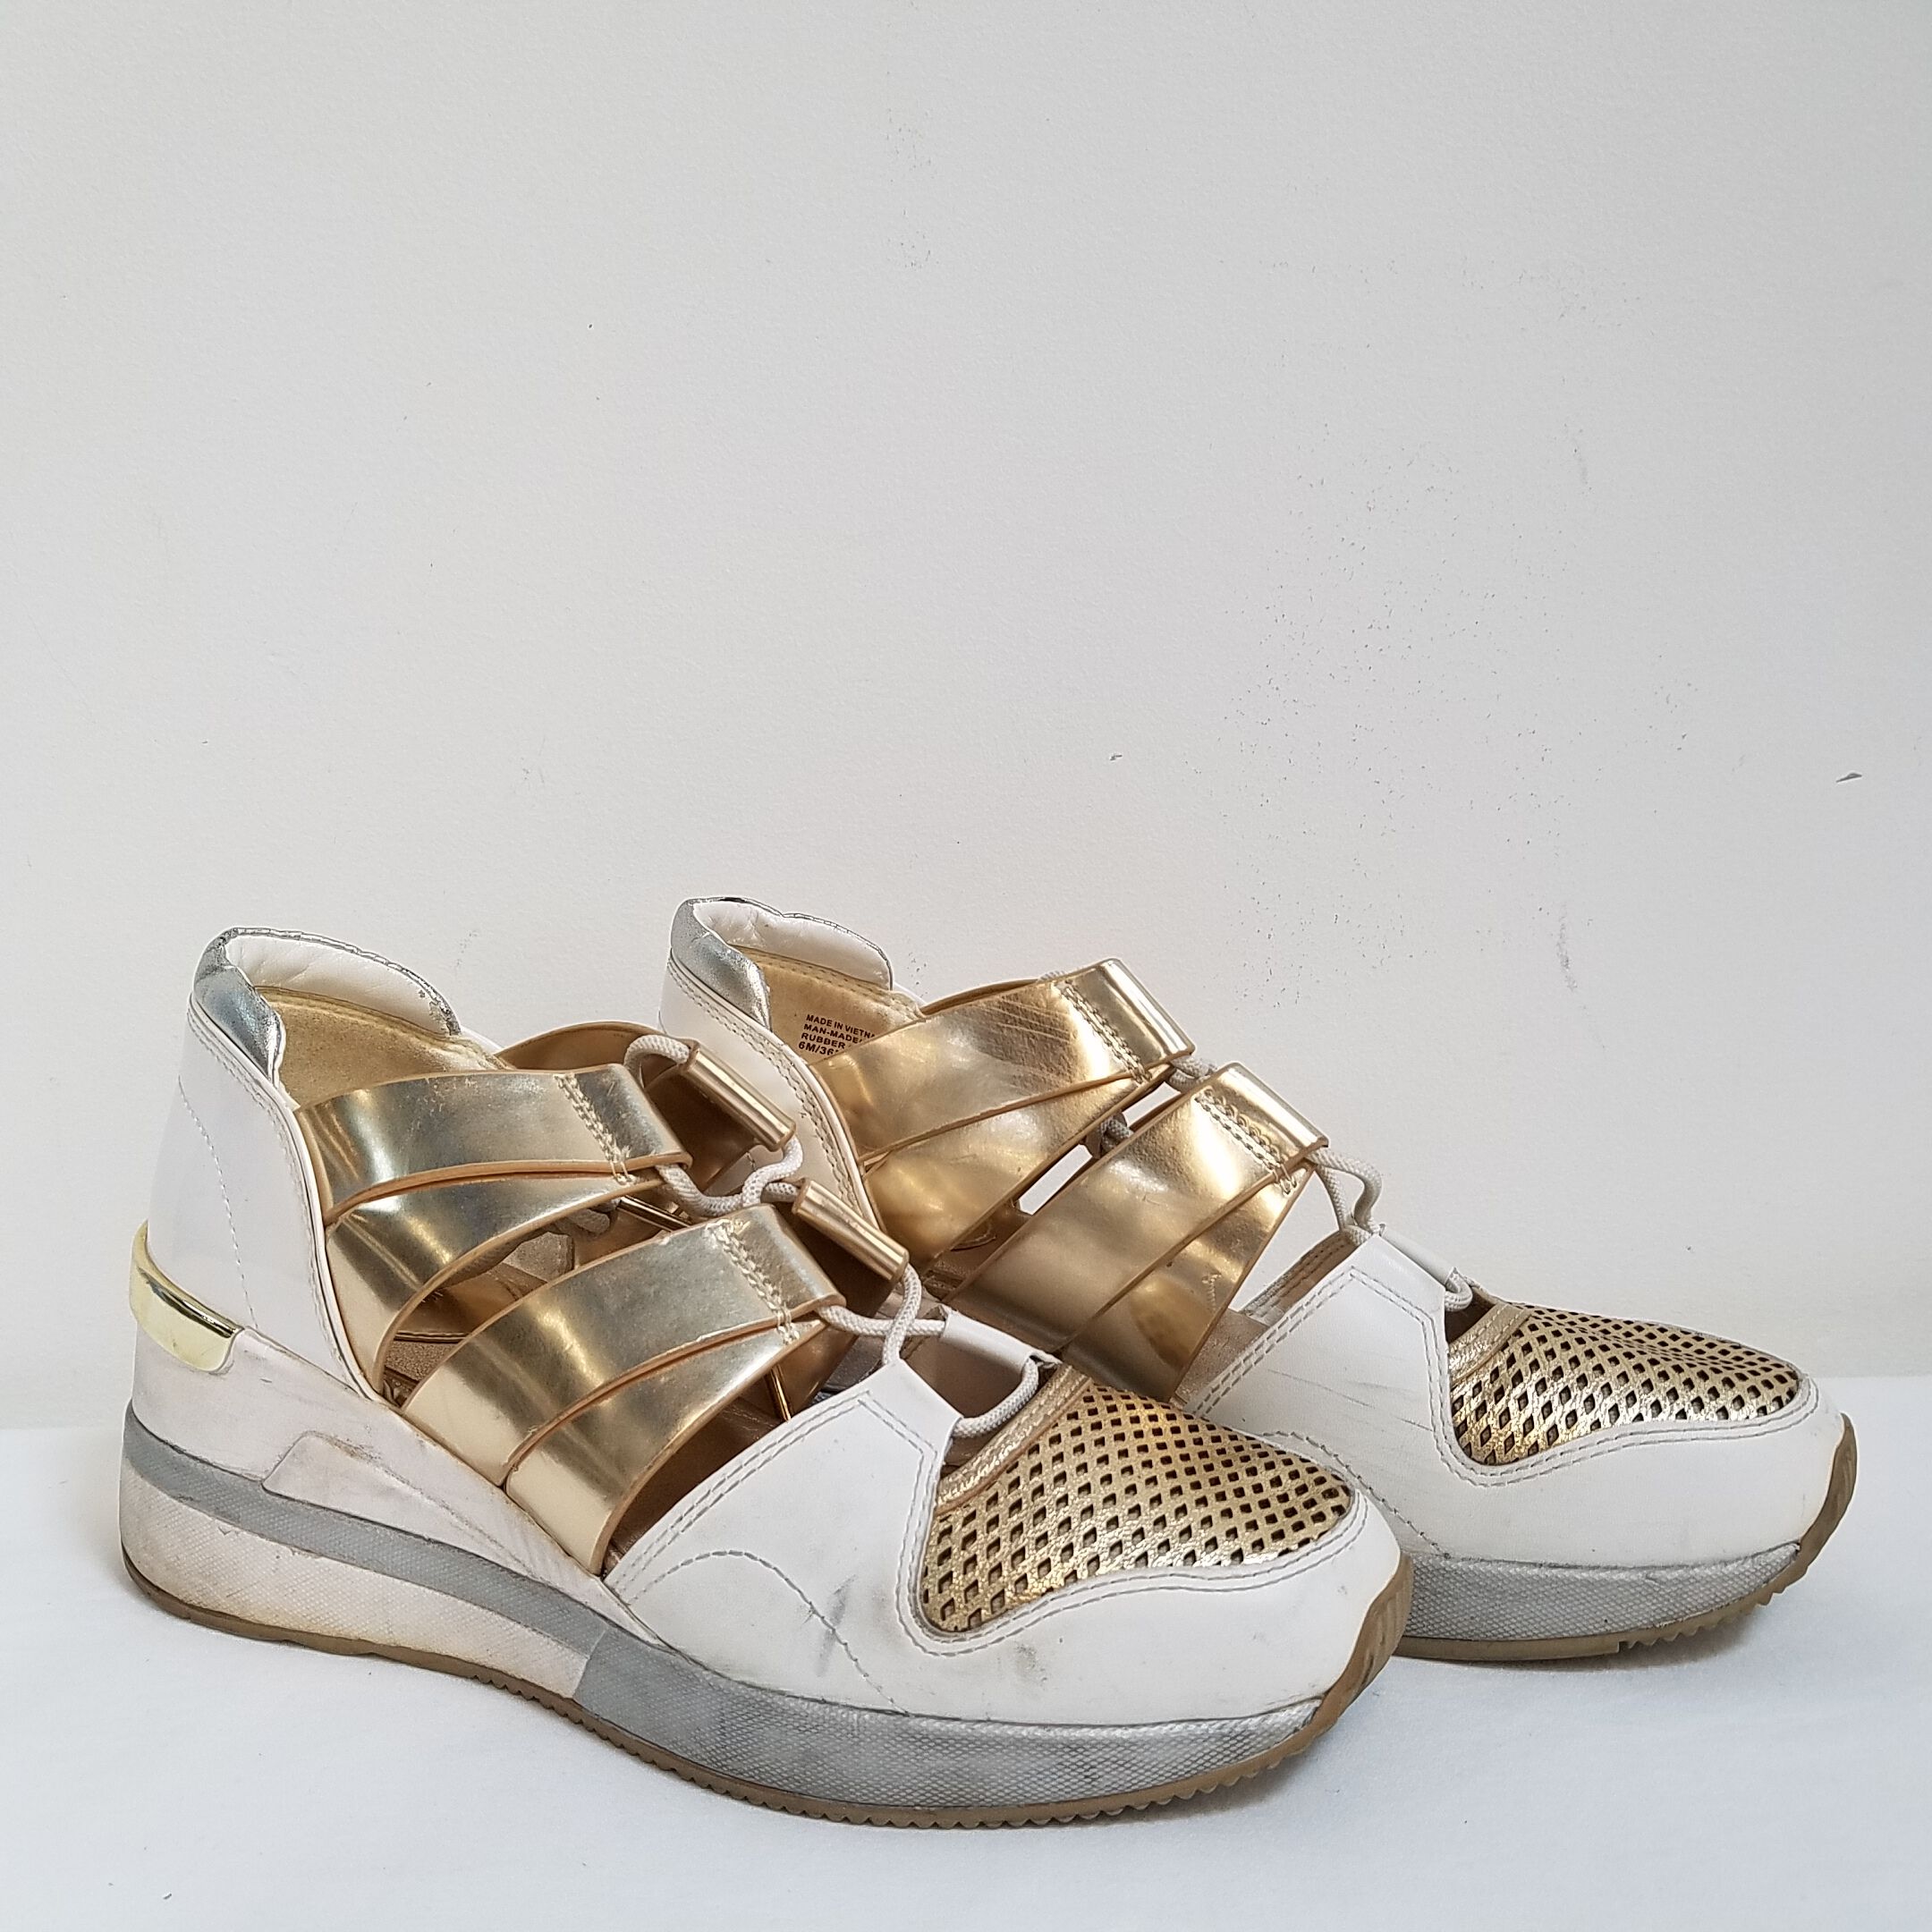 Guess gold wedge sneakers size 7.5 | eBay